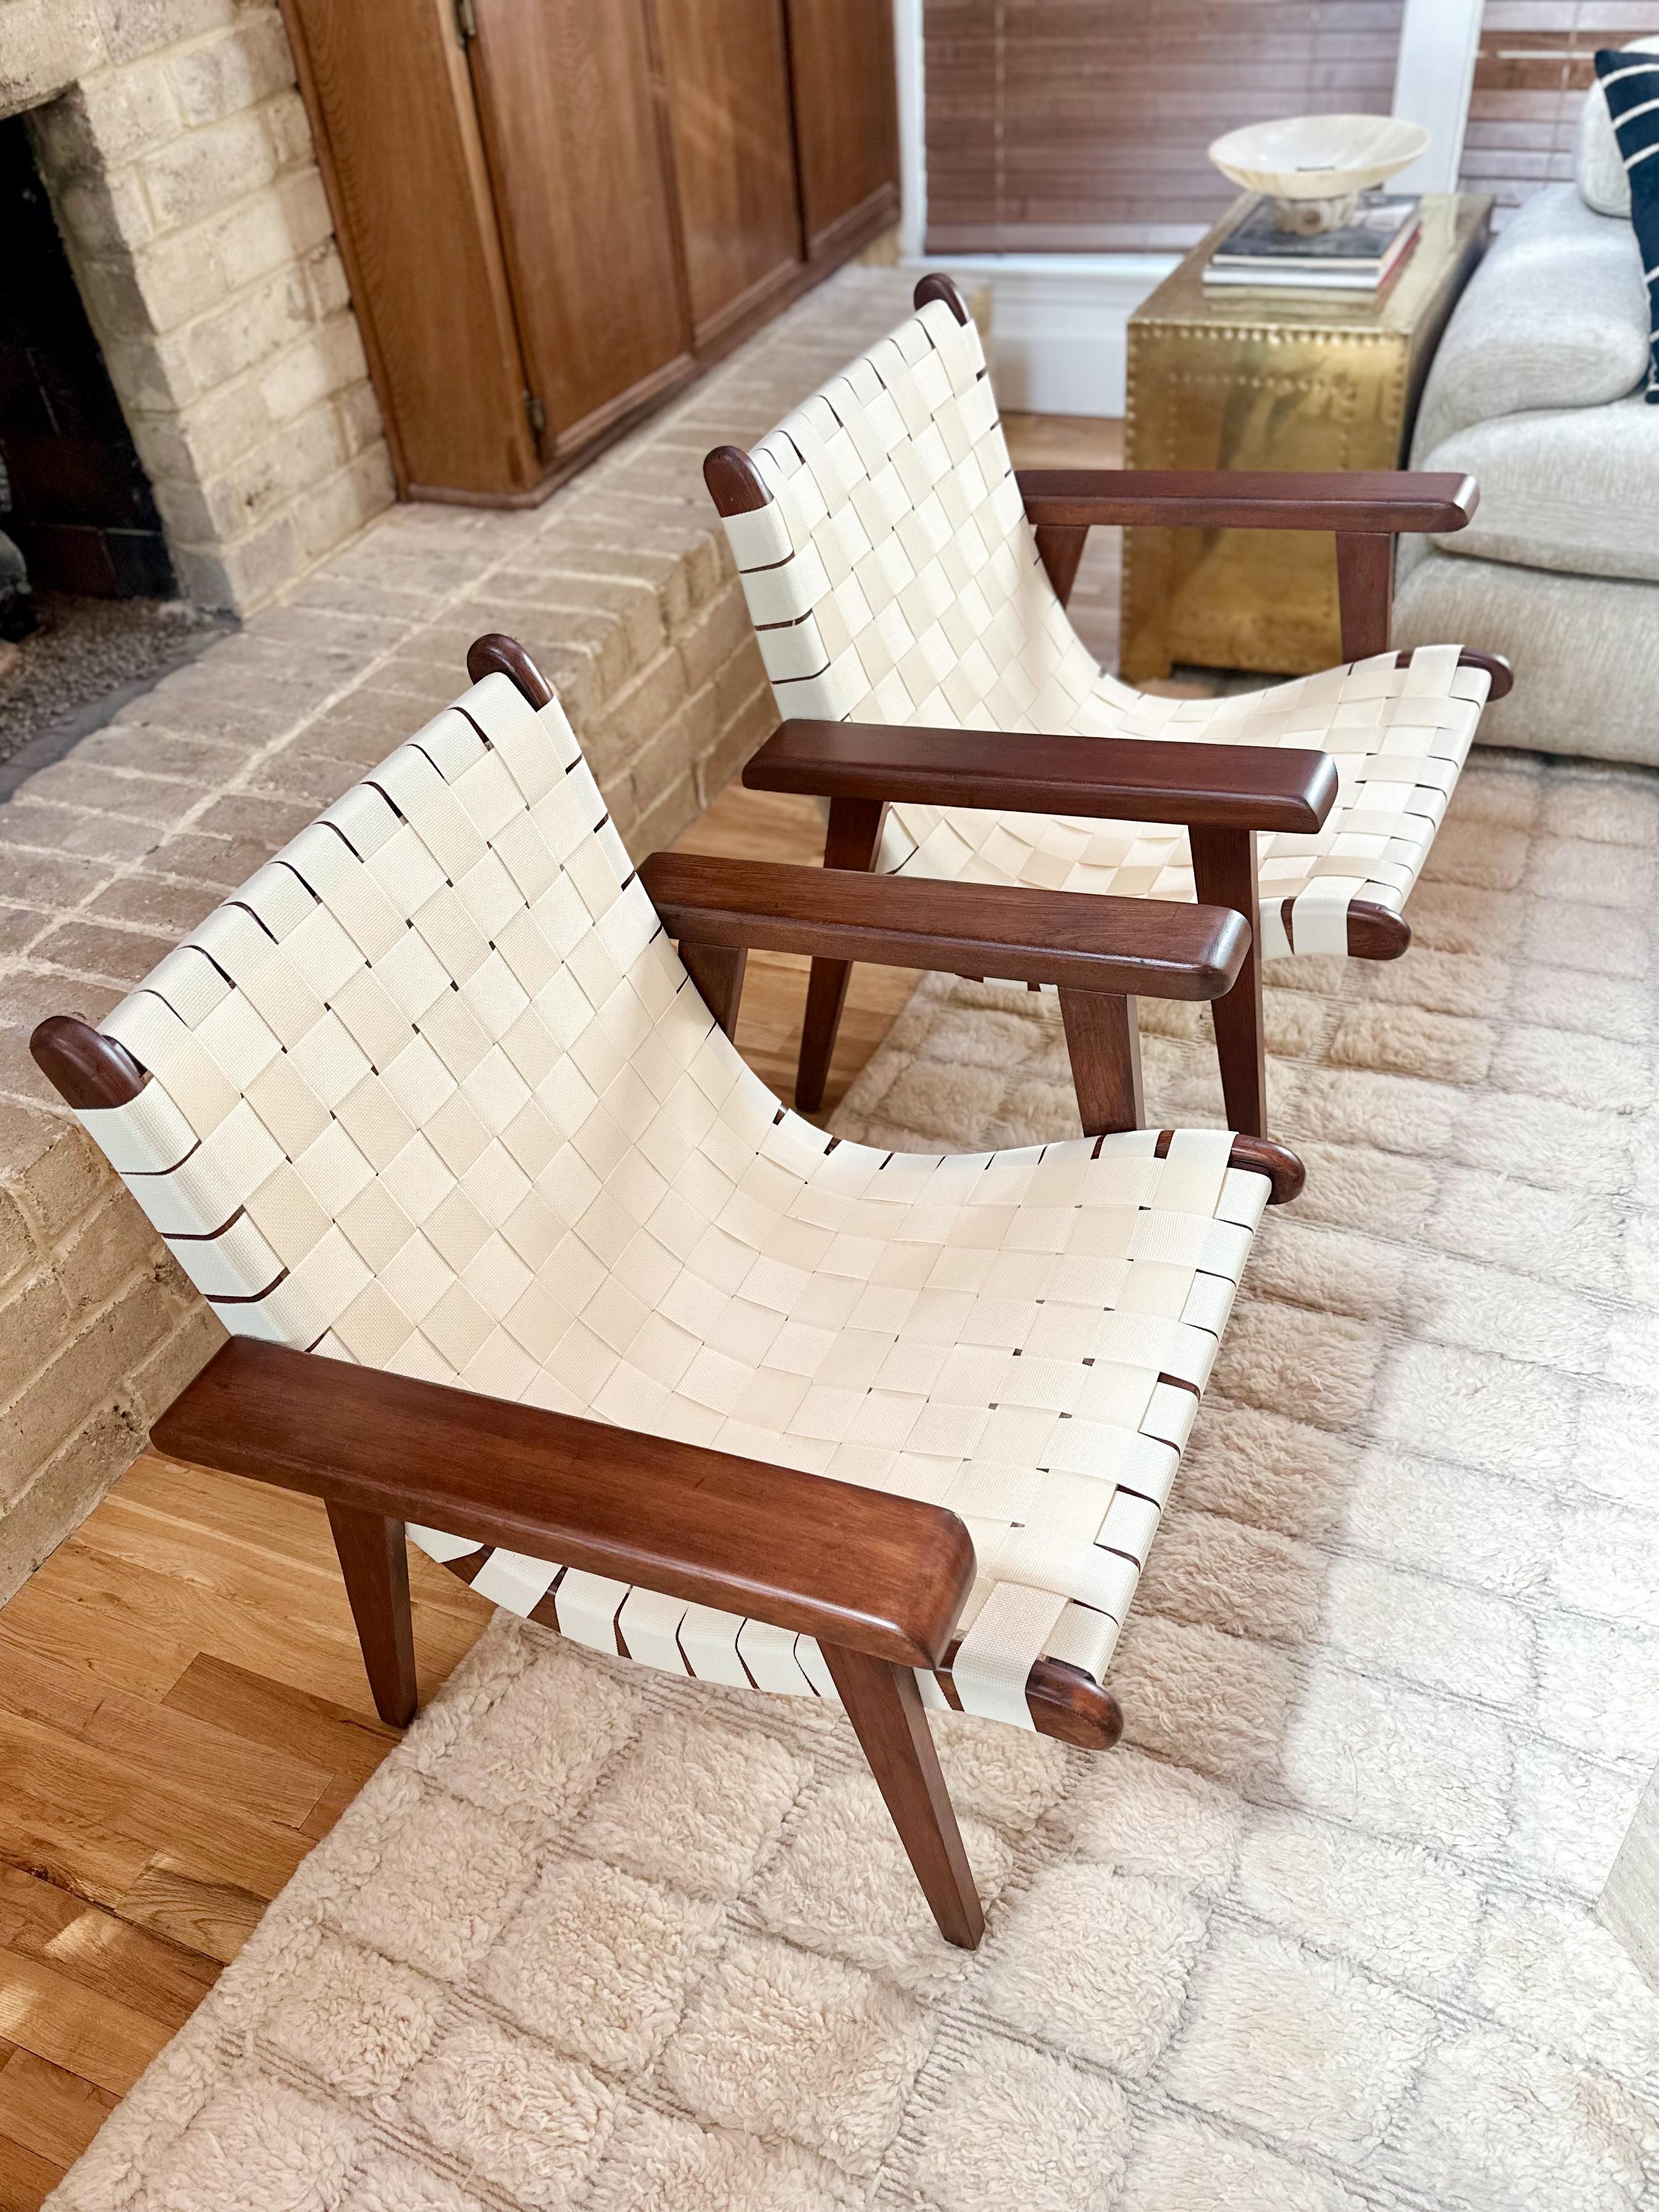 1950s 'San Miguelito' Arm Chairs by Michael Van Beuren for Domus - a pair In Excellent Condition For Sale In Houston, TX